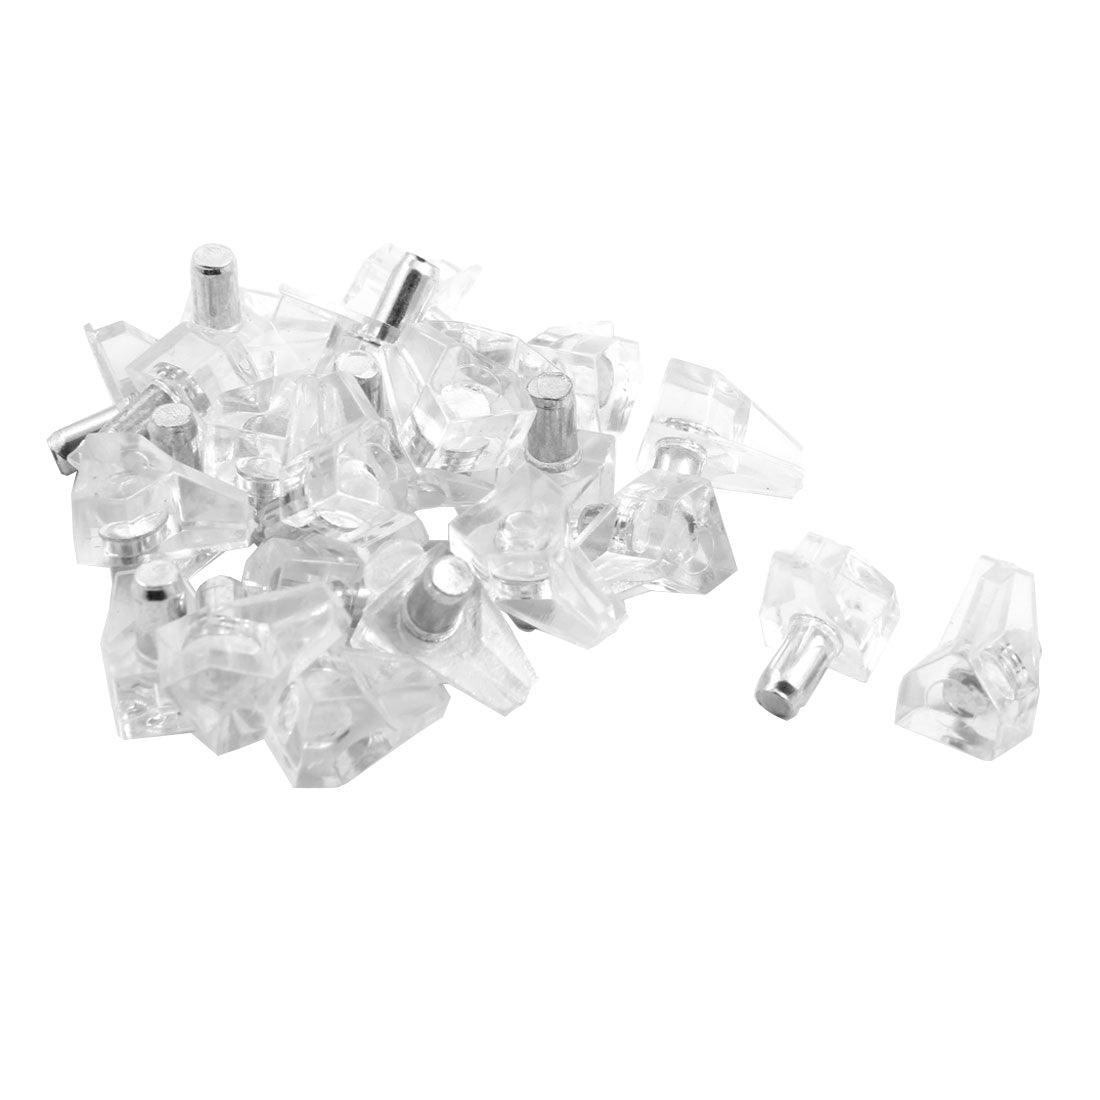 uxcell Uxcell Support Peg Stud Pin Shelf Cupboard Cabinet Clear 5mm Dia 25 Pcs for Kitchen